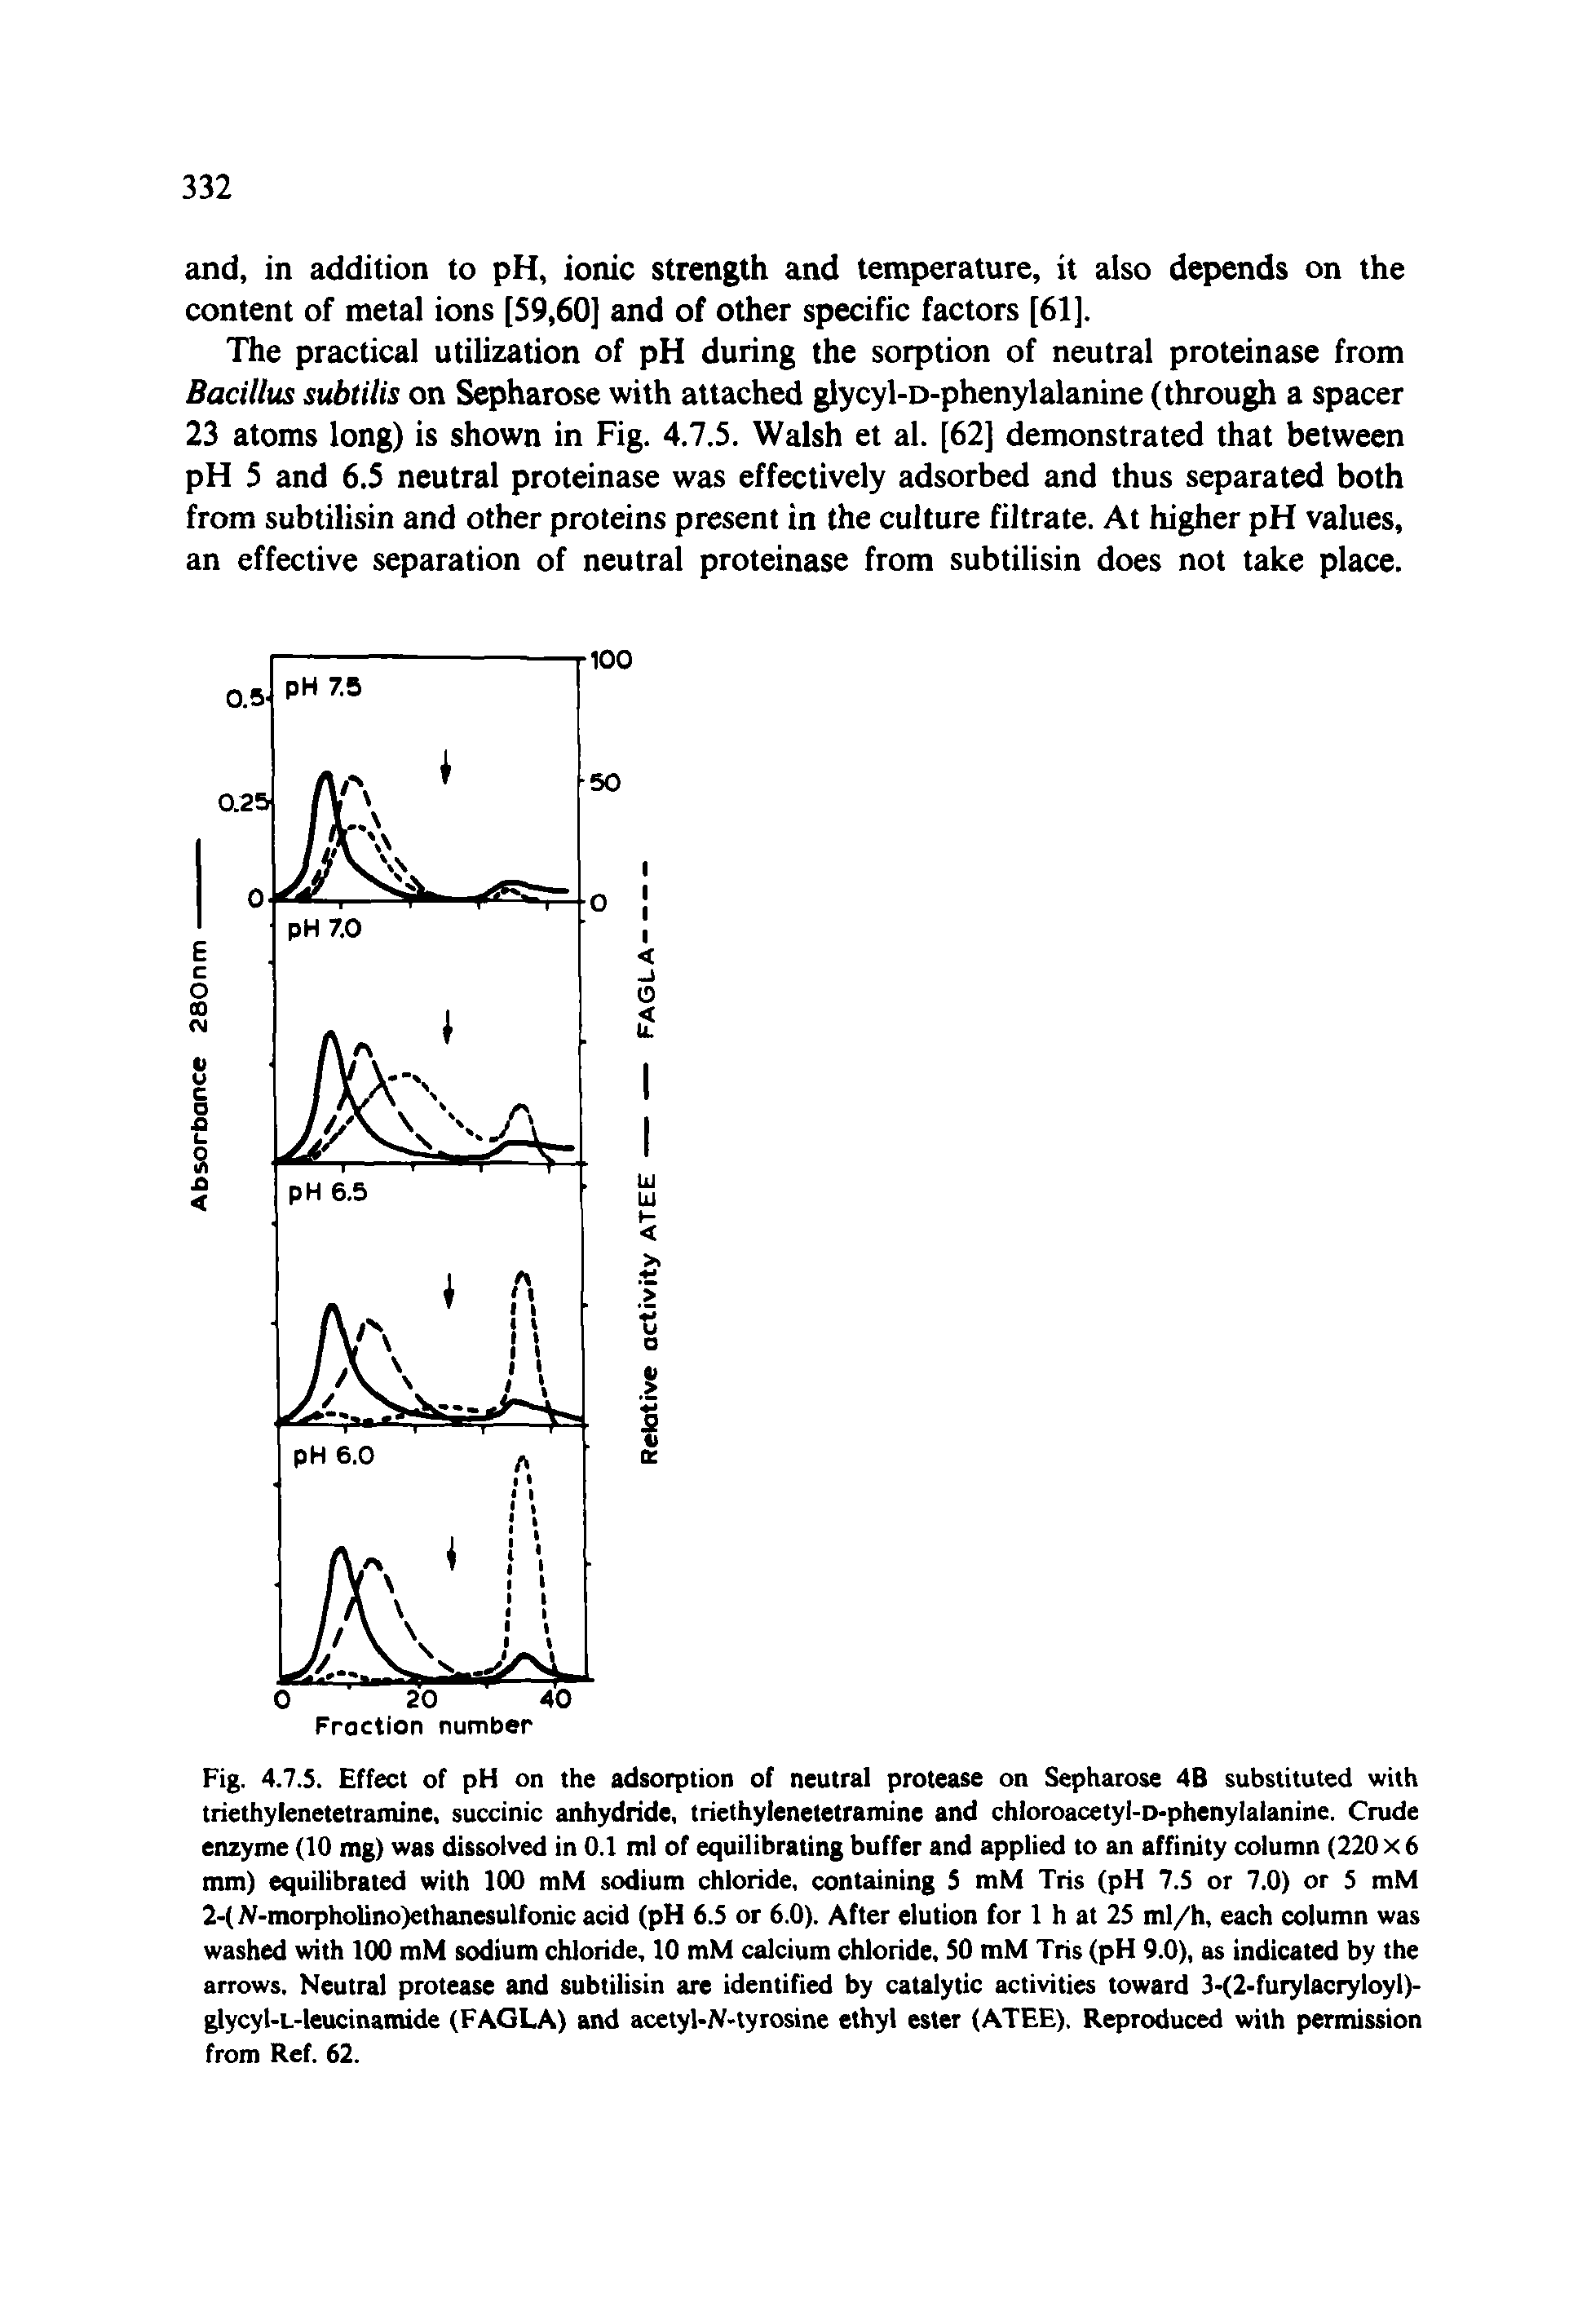 Fig. 4.7.S. Effect of pH on the adsorption of neutral protease on Sepharose 4B substituted with triethylenetetramine, succinic anhydride, triethylenetetramine and chloroacetyl-D-phenylalanine. Crude enzyme (10 mg) was dissolved in 0.1 ml of equilibrating buffer and applied to an affinity column (220x6 mm) equilibrated with 1(X) mM sodium chloride, containing 5 mM Tris (pH 7.5 or 7.0) or 5 mM 2-( -morpholino)ethanesulfonic acid (pH 6.5 or 6.0). After elution for 1 h at 25 ml/h, each column was washed with 100 mM sodium chloride, 10 mM calcium chloride, 50 mM Tris (pH 9.0), as indicated by the arrows. Neutral protease and subtilisin are identified by catalytic activities toward 3-(2-furylacryloyl)-glycyt-L-leucinamide (FAGLA) and acetyl-JV-tyrosine ethyl ester (ATEE), Reproduced with permission from Ref. 62.